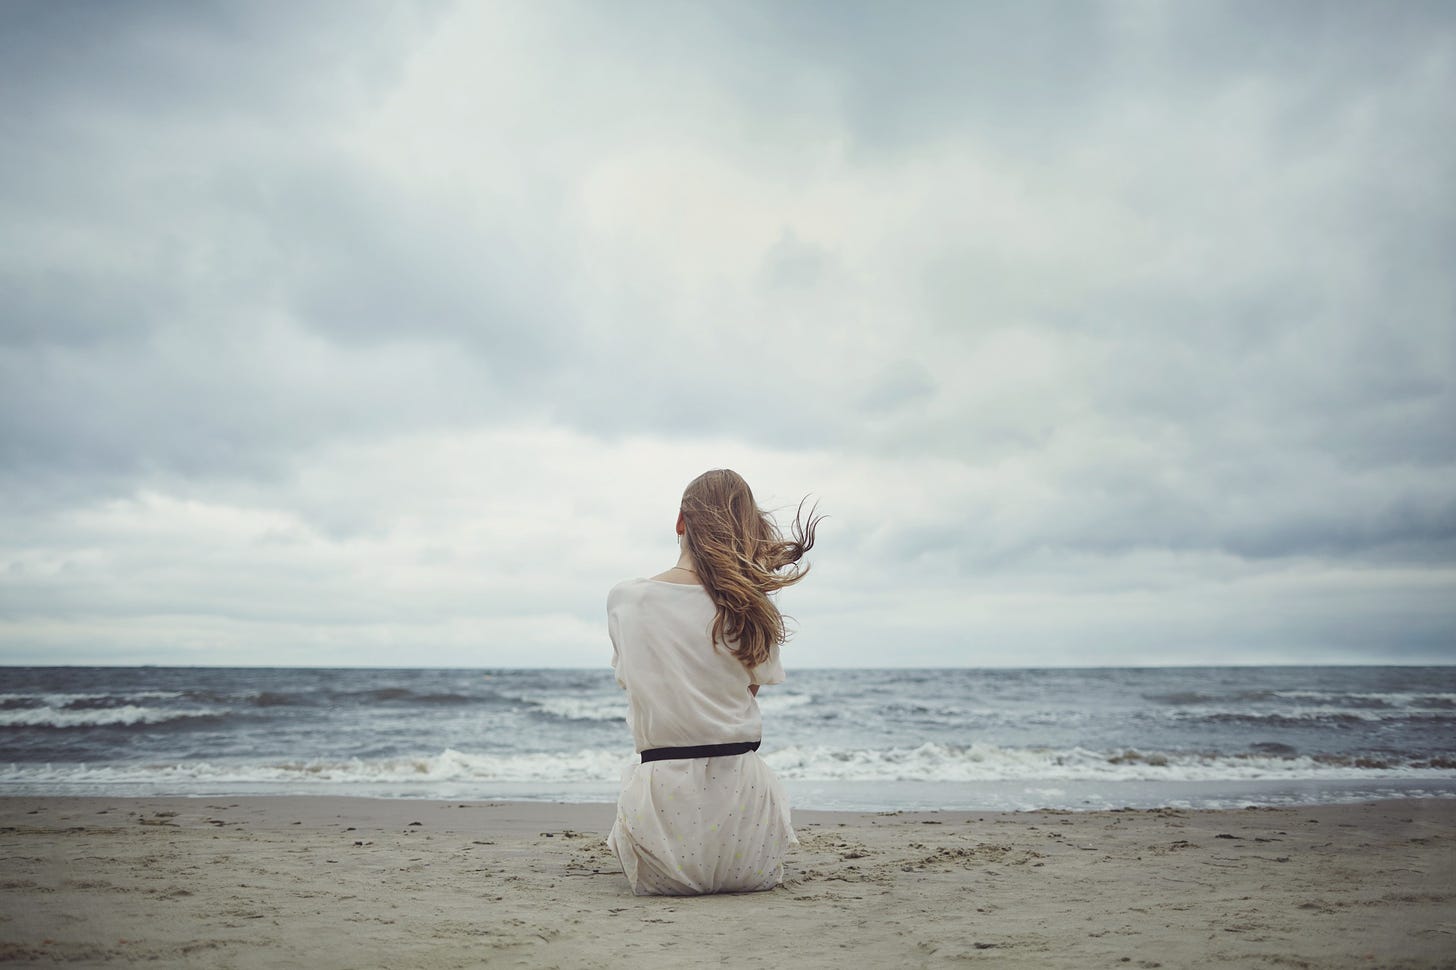 A woman sits alone on a windy beach as a storm comes in.